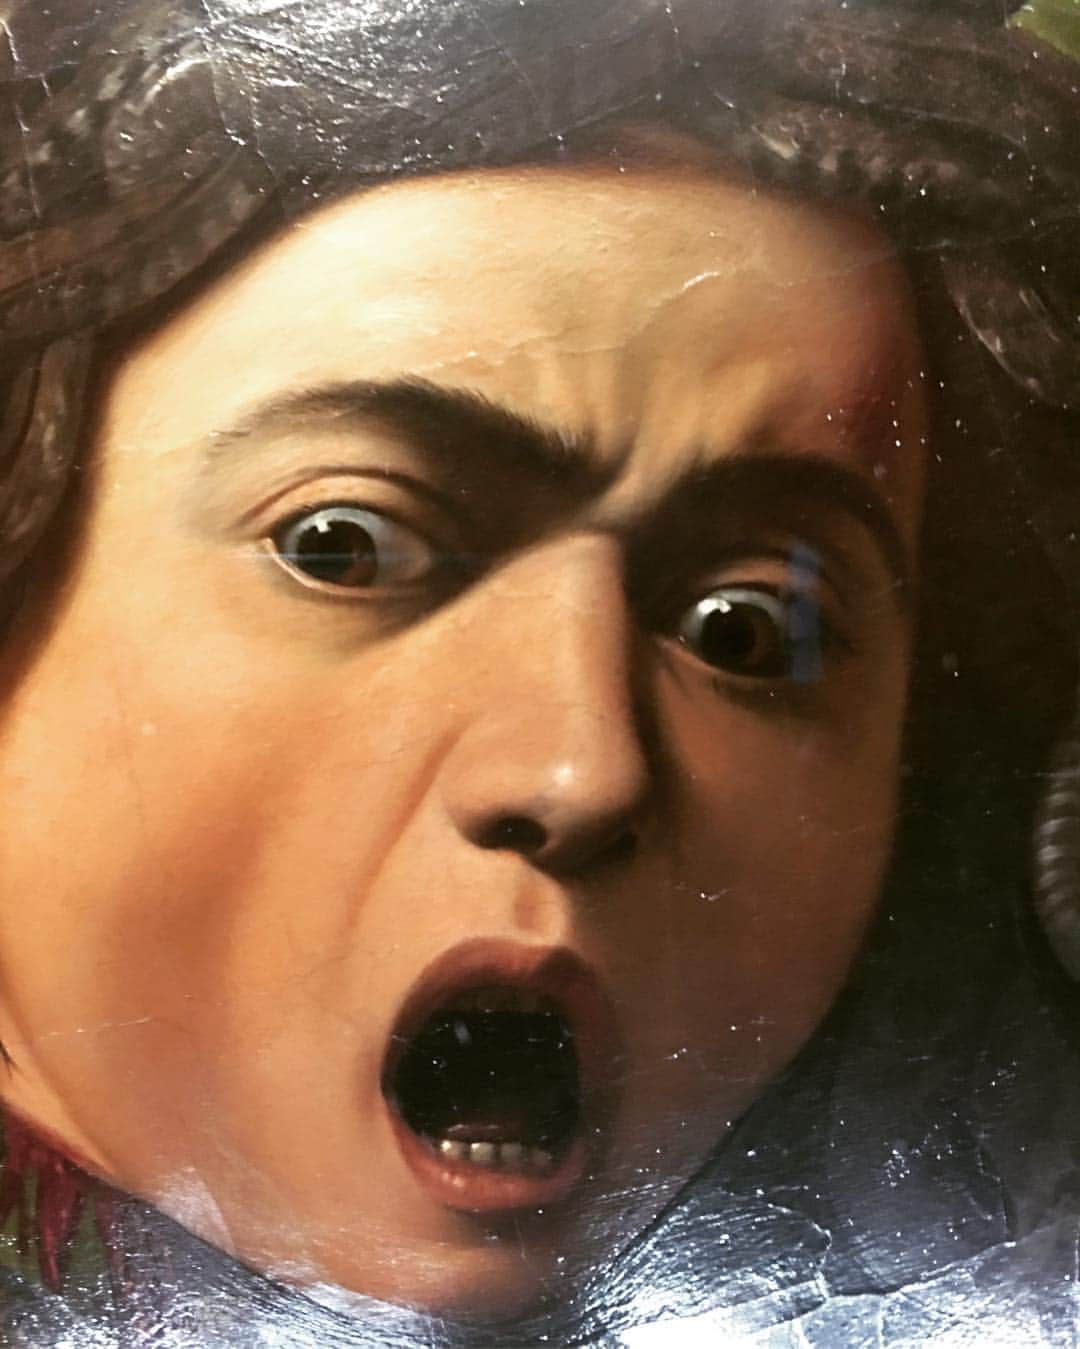 アンソニー・ボーディンさんのインスタグラム写真 - (アンソニー・ボーディンInstagram)「ON THE MEDUSA OF LEONARDO DA VINCI, IN THE FLORENTINE GALLERY.  I T lieth, gazing on the midnight sky,  Upon the cloudy mountain peak supine;  Below, far lands are seen tremblingly;  Its horror and its beauty are divine.  Upon its lips and eyelids seems to lie	5  Loveliness like a shadow, from which shrine,  Fiery and lurid, struggling underneath,  The agonies of anguish and of death.  Yet it is less the horror than the grace  Which turns the gazer's spirit into stone;	10  Whereon the lineaments of that dead face  Are graven, till the characters be grown  Into itself, and thought no more can trace; 'Tis the melodious hue of beauty thrown  Athwart the darkness and the glare of pain,	15  Which humanize and harmonize the strain.  And from its head as from one body grow,  As [ ] grass out of a watery rock,  Hairs which are vipers, and they curl and flow  And their long tangles in each other lock,	20  And with unending involutions shew  Their mailed radiance, as it were to mock  The torture and the death within, and saw  The solid air with many a ragged jaw.  And from a stone beside, a poisonous eft	25  Peeps idly into those Gorgonian eyes;  Whilst in the air a ghastly bat, bereft  Of sense, has flitted with a mad surprise  Out of the cave this hideous light had cleft,  And he comes hastening like a moth that hies	30  After a taper; and the midnight sky  Flares, a light more dread than obscurity. 'Tis the tempestuous loveliness of terror;  For from the serpents gleams a brazen glare  Kindled by that inextricable error,	35  Which makes a thrilling vapour of the air  Become a [ ] and ever-shifting mirror  Of all the beauty and the terror there-  A woman's countenance, with serpent locks,  Gazing in death on heaven from those wet rocks.  Shelley」5月22日 3時00分 - anthonybourdain